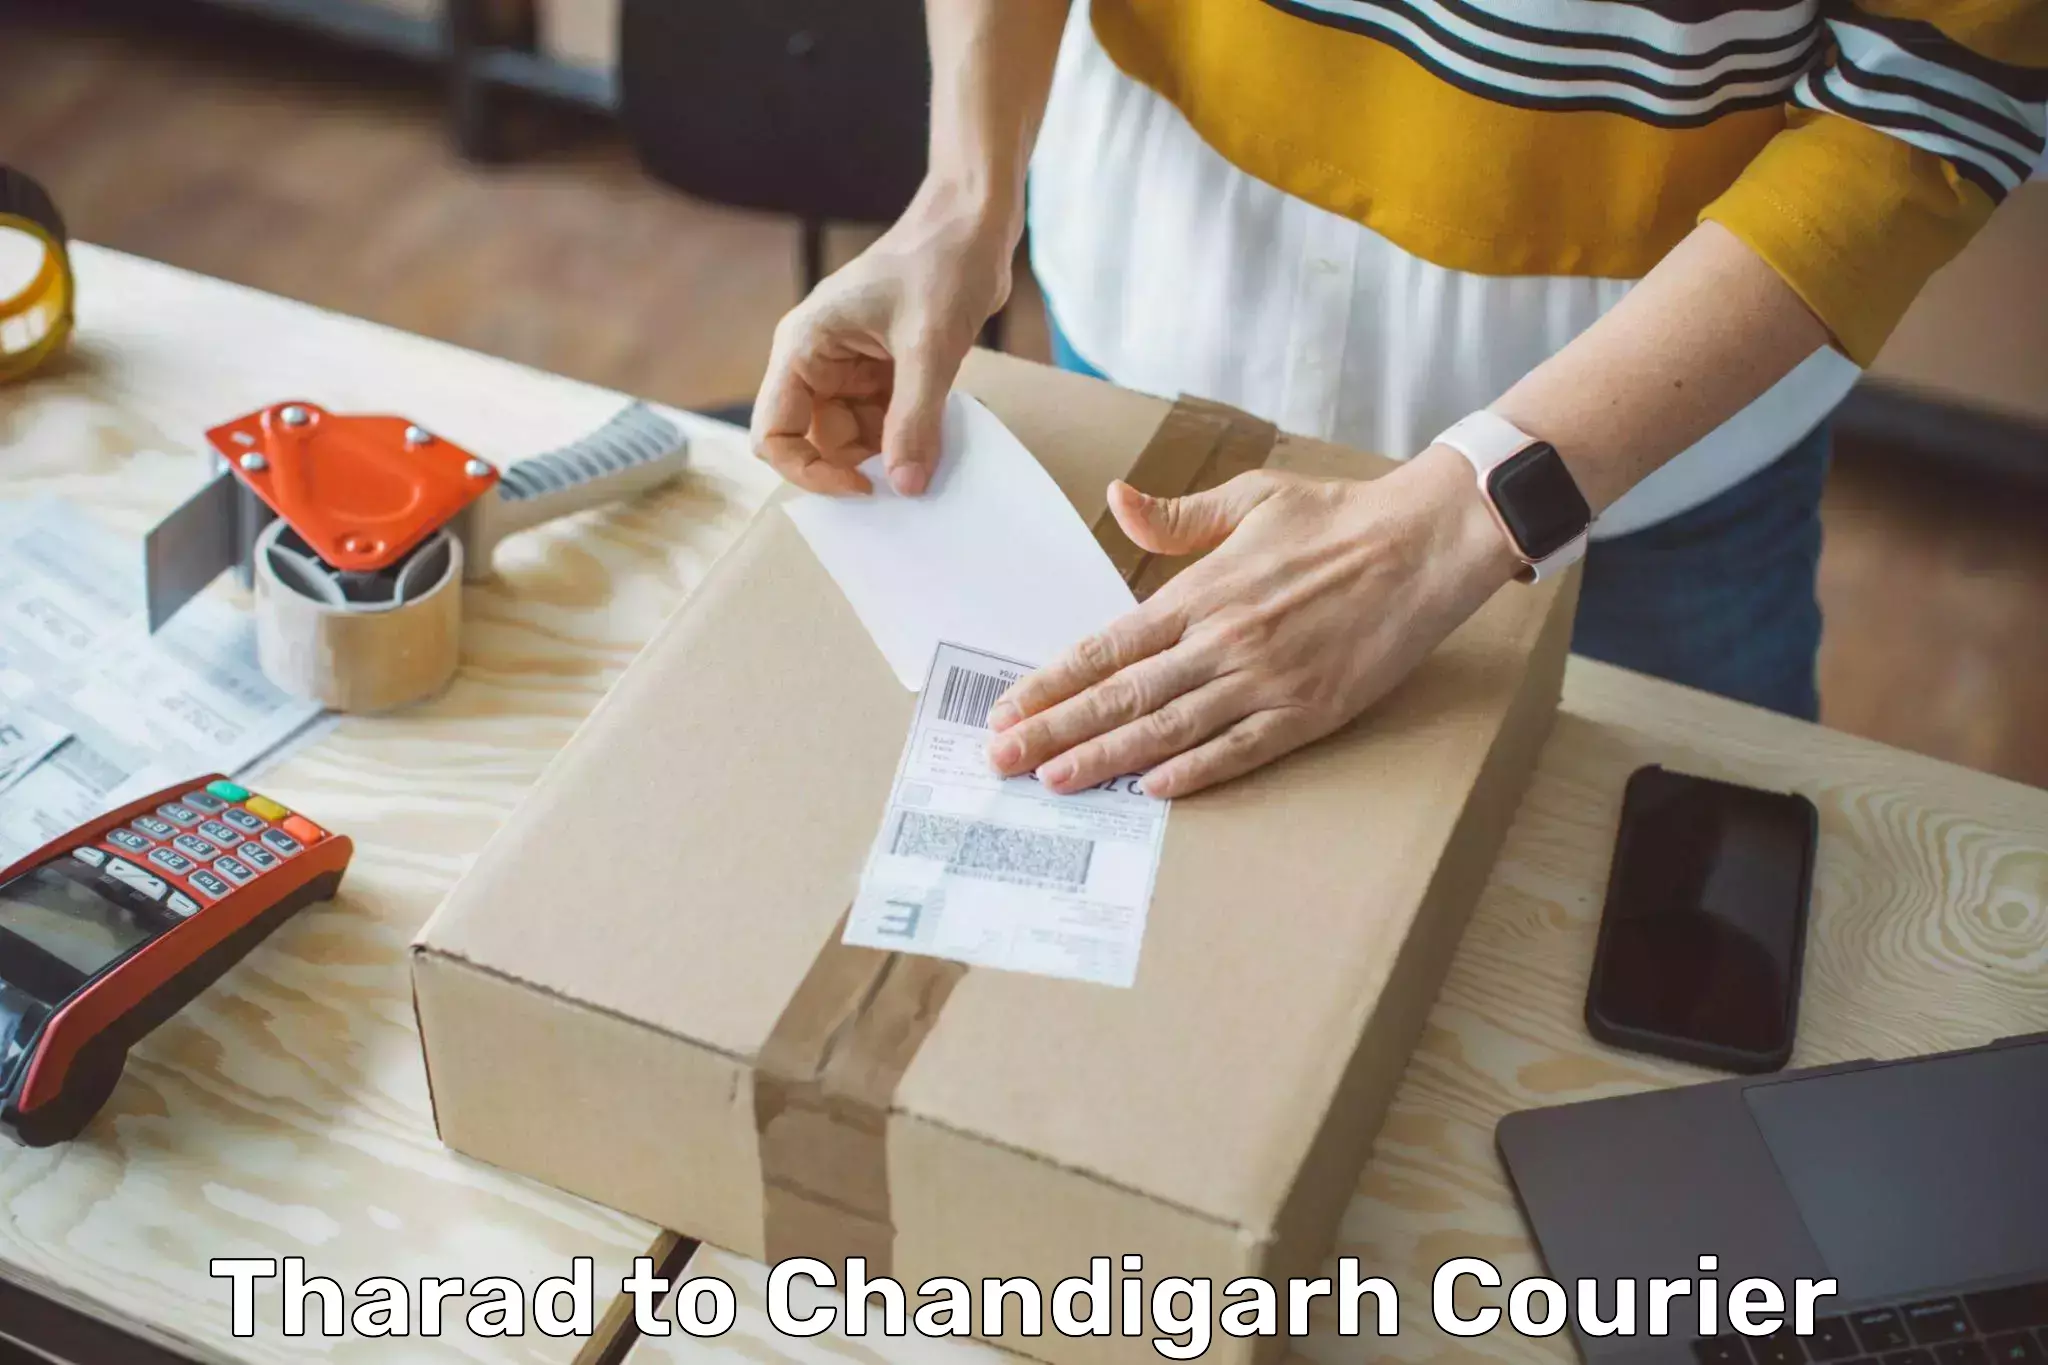 Package delivery network Tharad to Chandigarh